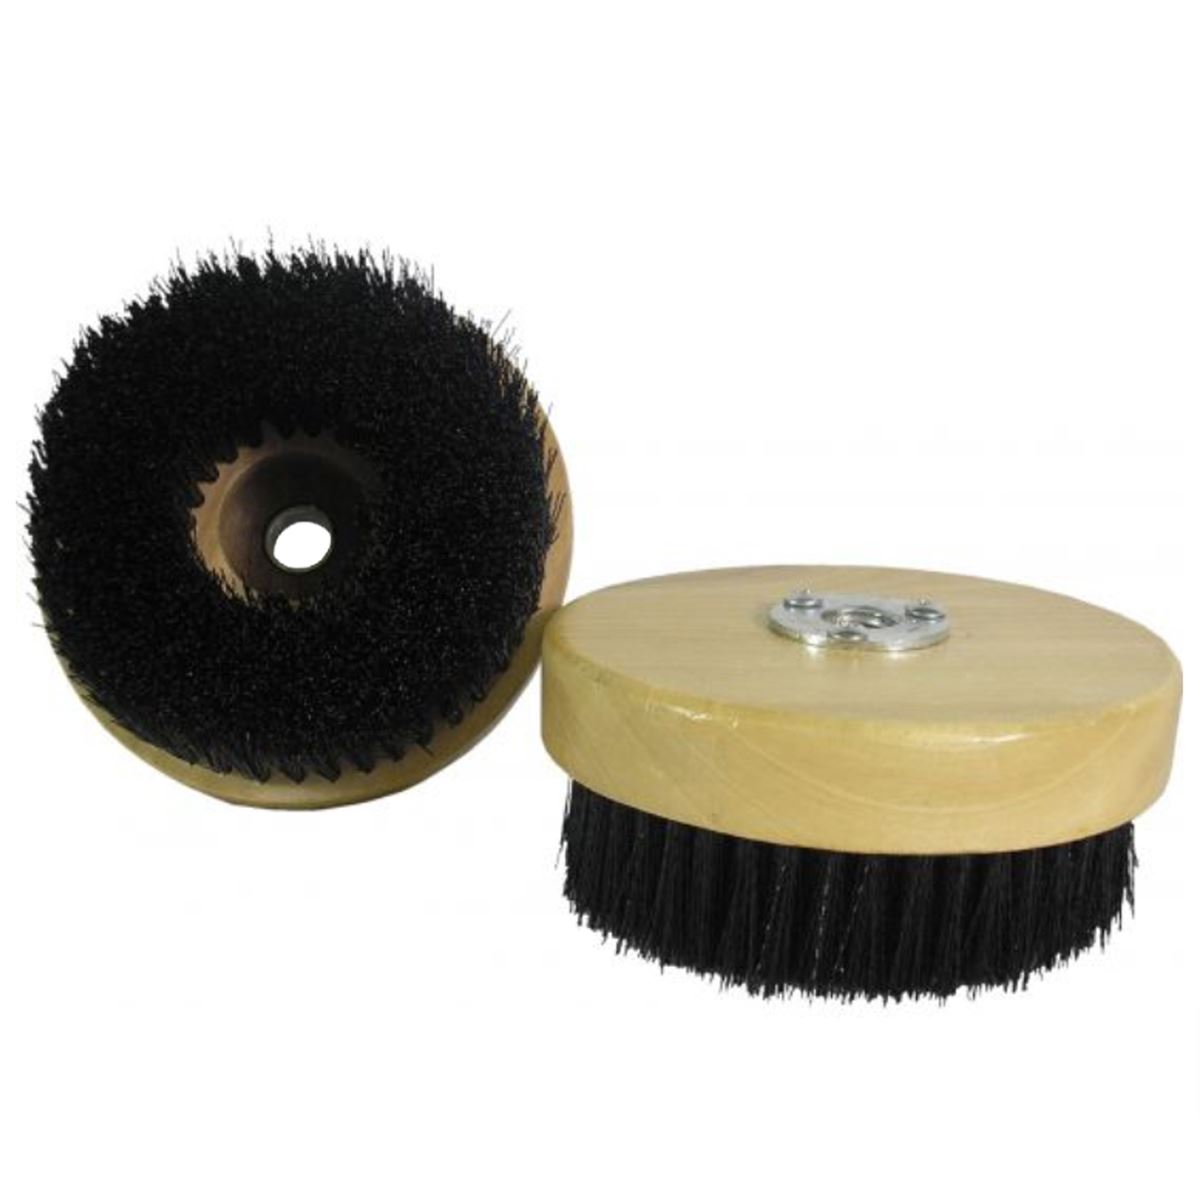 ROTARY DIRECT MOUNT UPHOLSTERY BRUSH. Professional Detailing